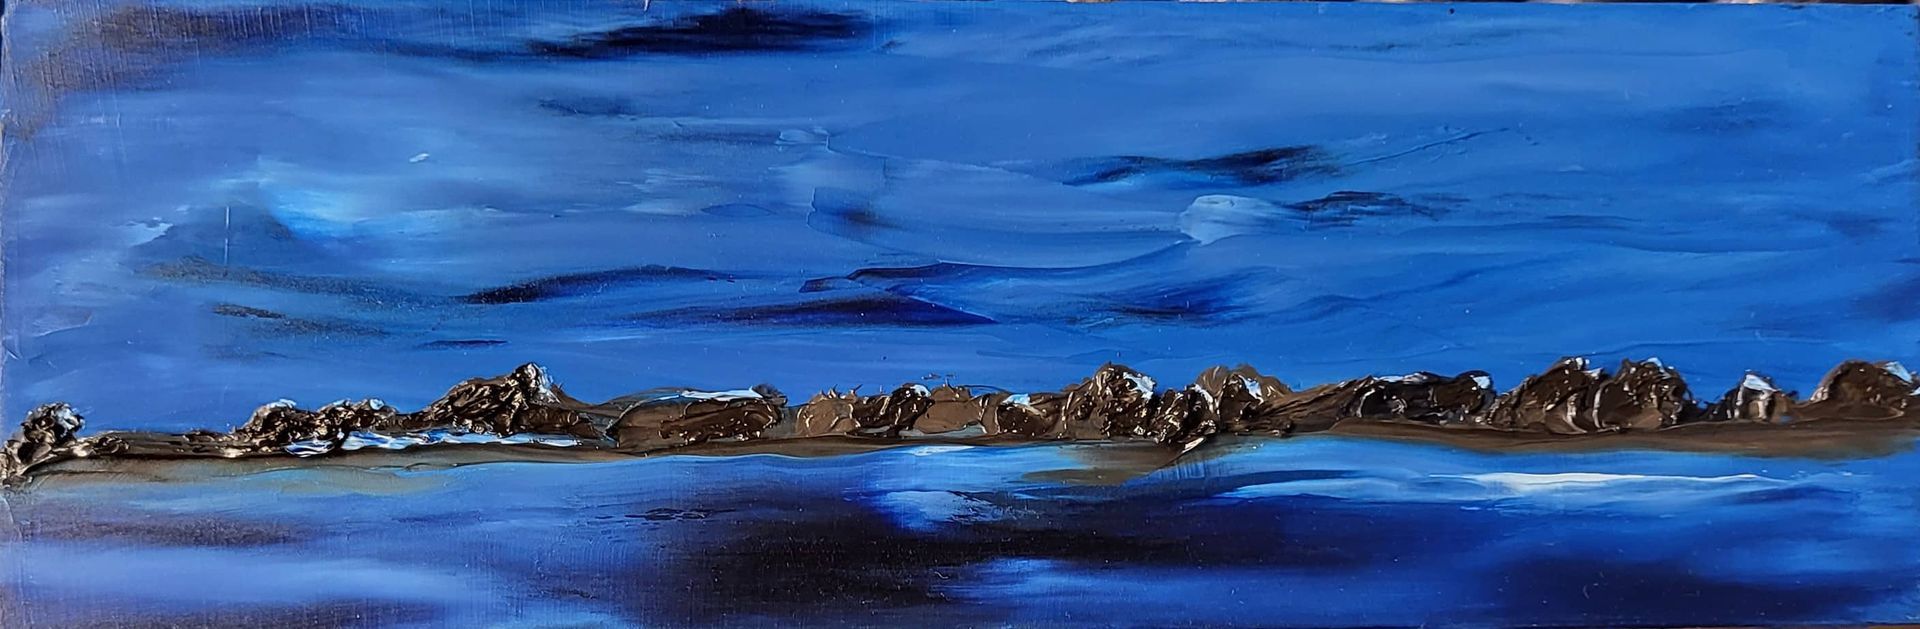 #O-71 Oil on Masonite 9 in. x 3 in. with small easel. A midnight sky reflected in the water below.  The shore line and its peeks reflect the moonlight. The blending of Prussian, Manganese blues with white create a peaceful feeling. The lone wavelet highlighted in white belies the calm.